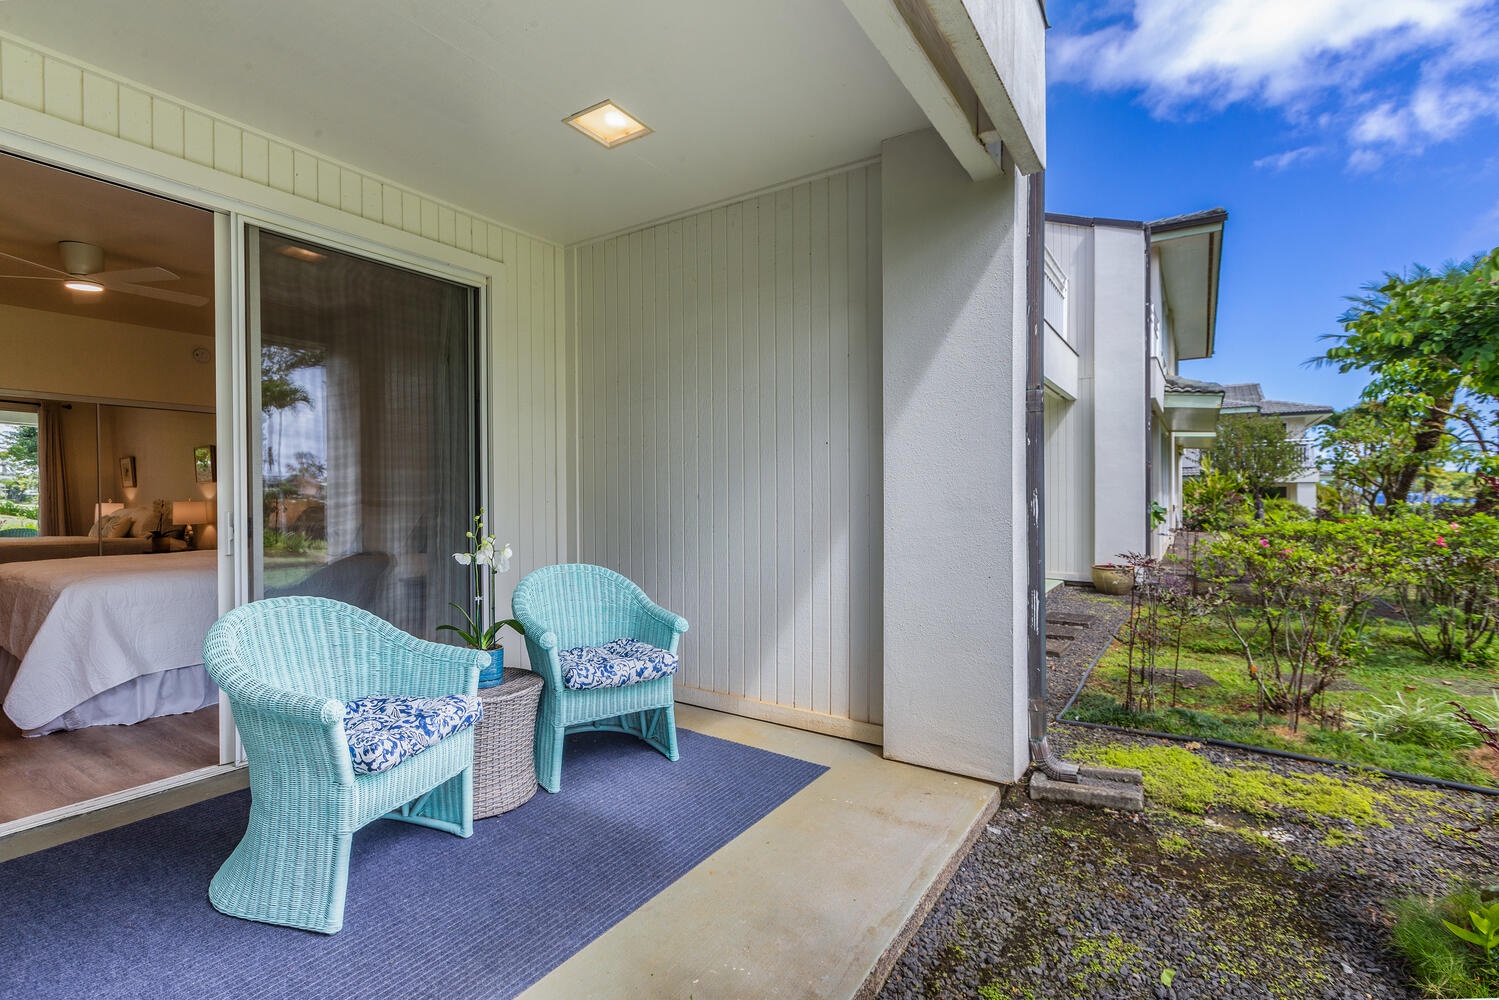 Princeville Vacation Rentals, Emmalani Court 414 - Enjoy your morning cup of coffee in the sun on the lanai